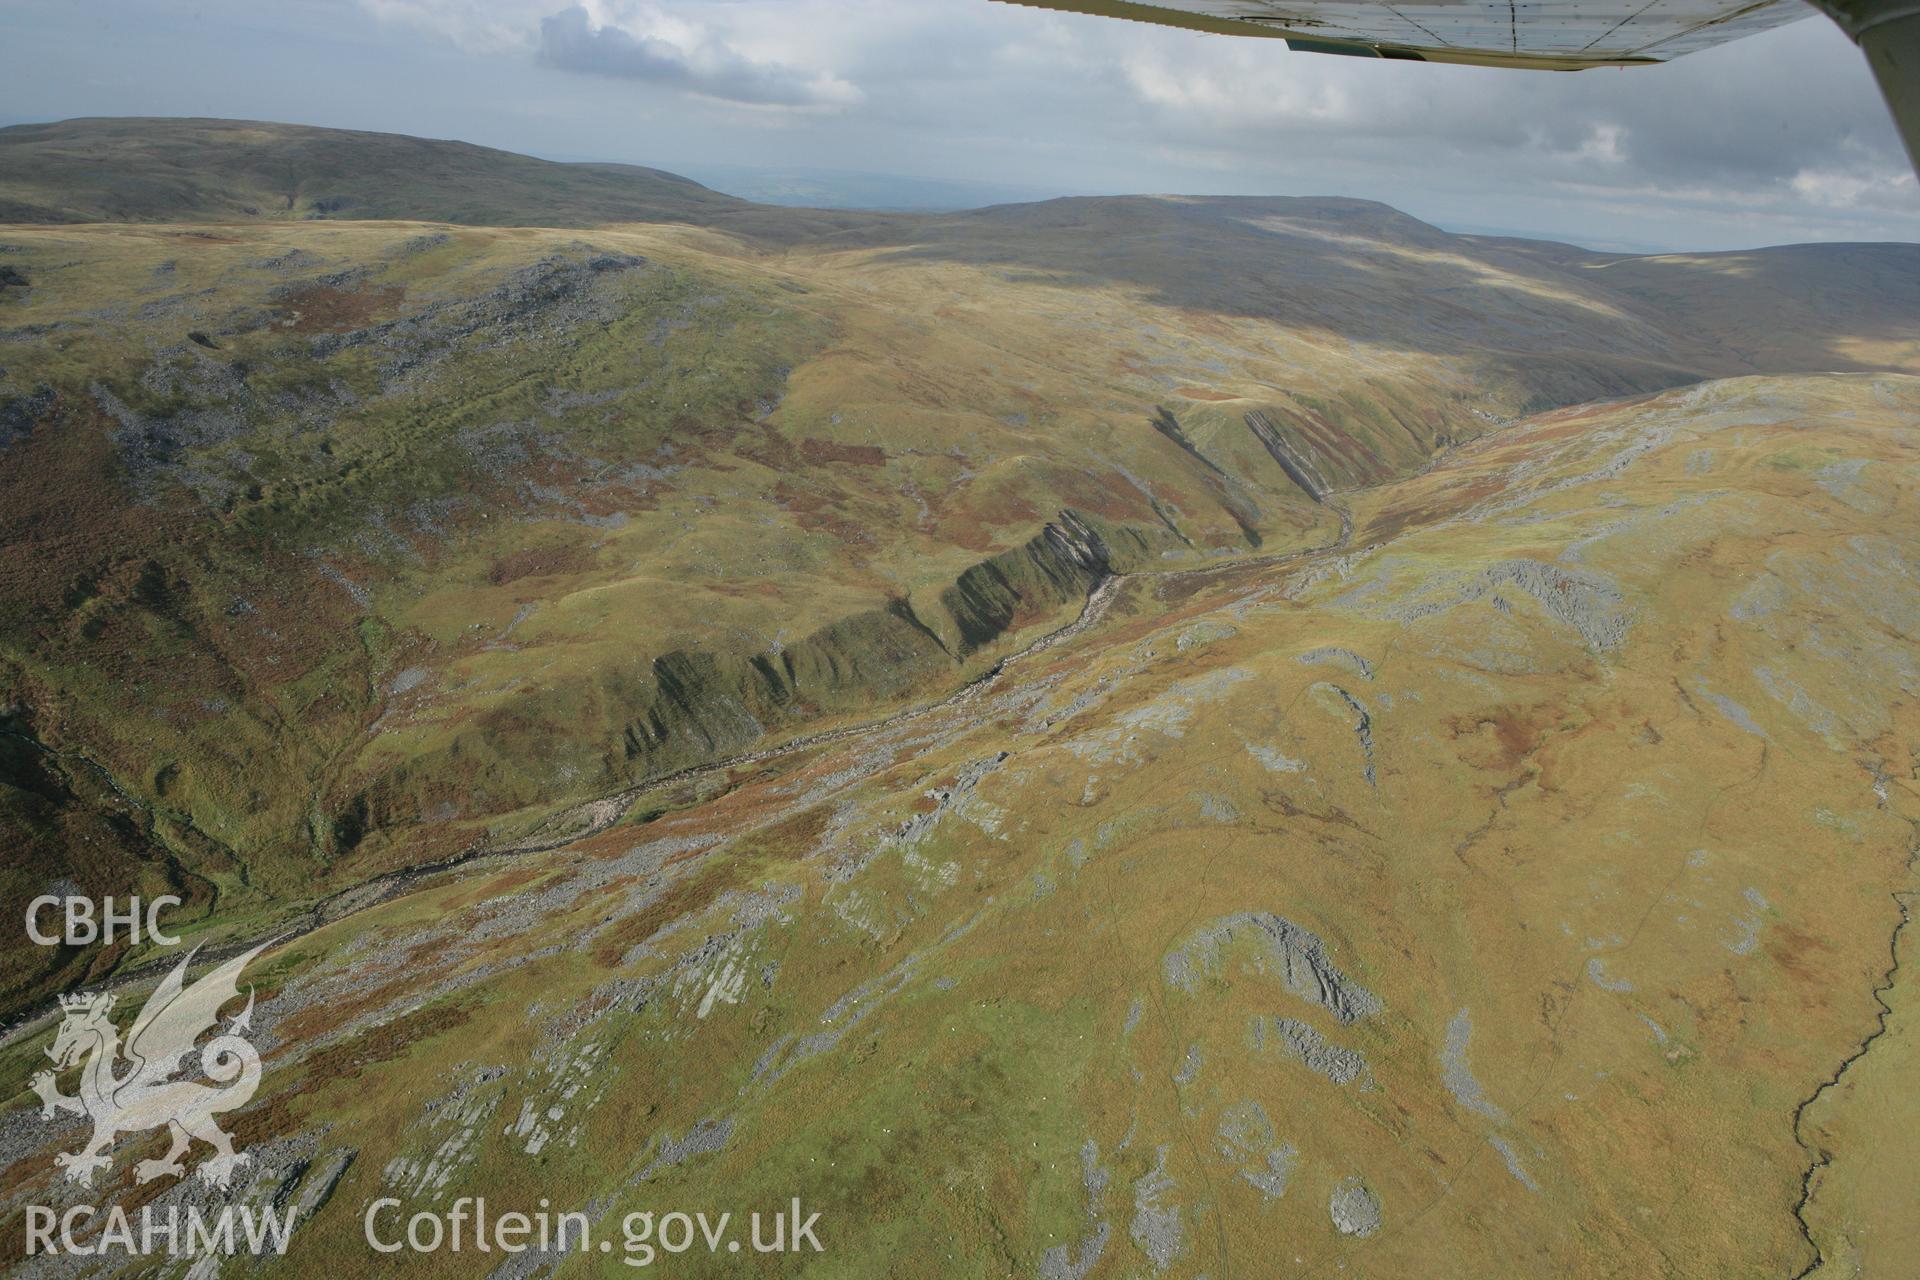 RCAHMW colour oblique aerial photograph of Upper Cwm Twrch, deserted rural settlement, looking towards the north-west. Taken on 14 October 2009 by Toby Driver